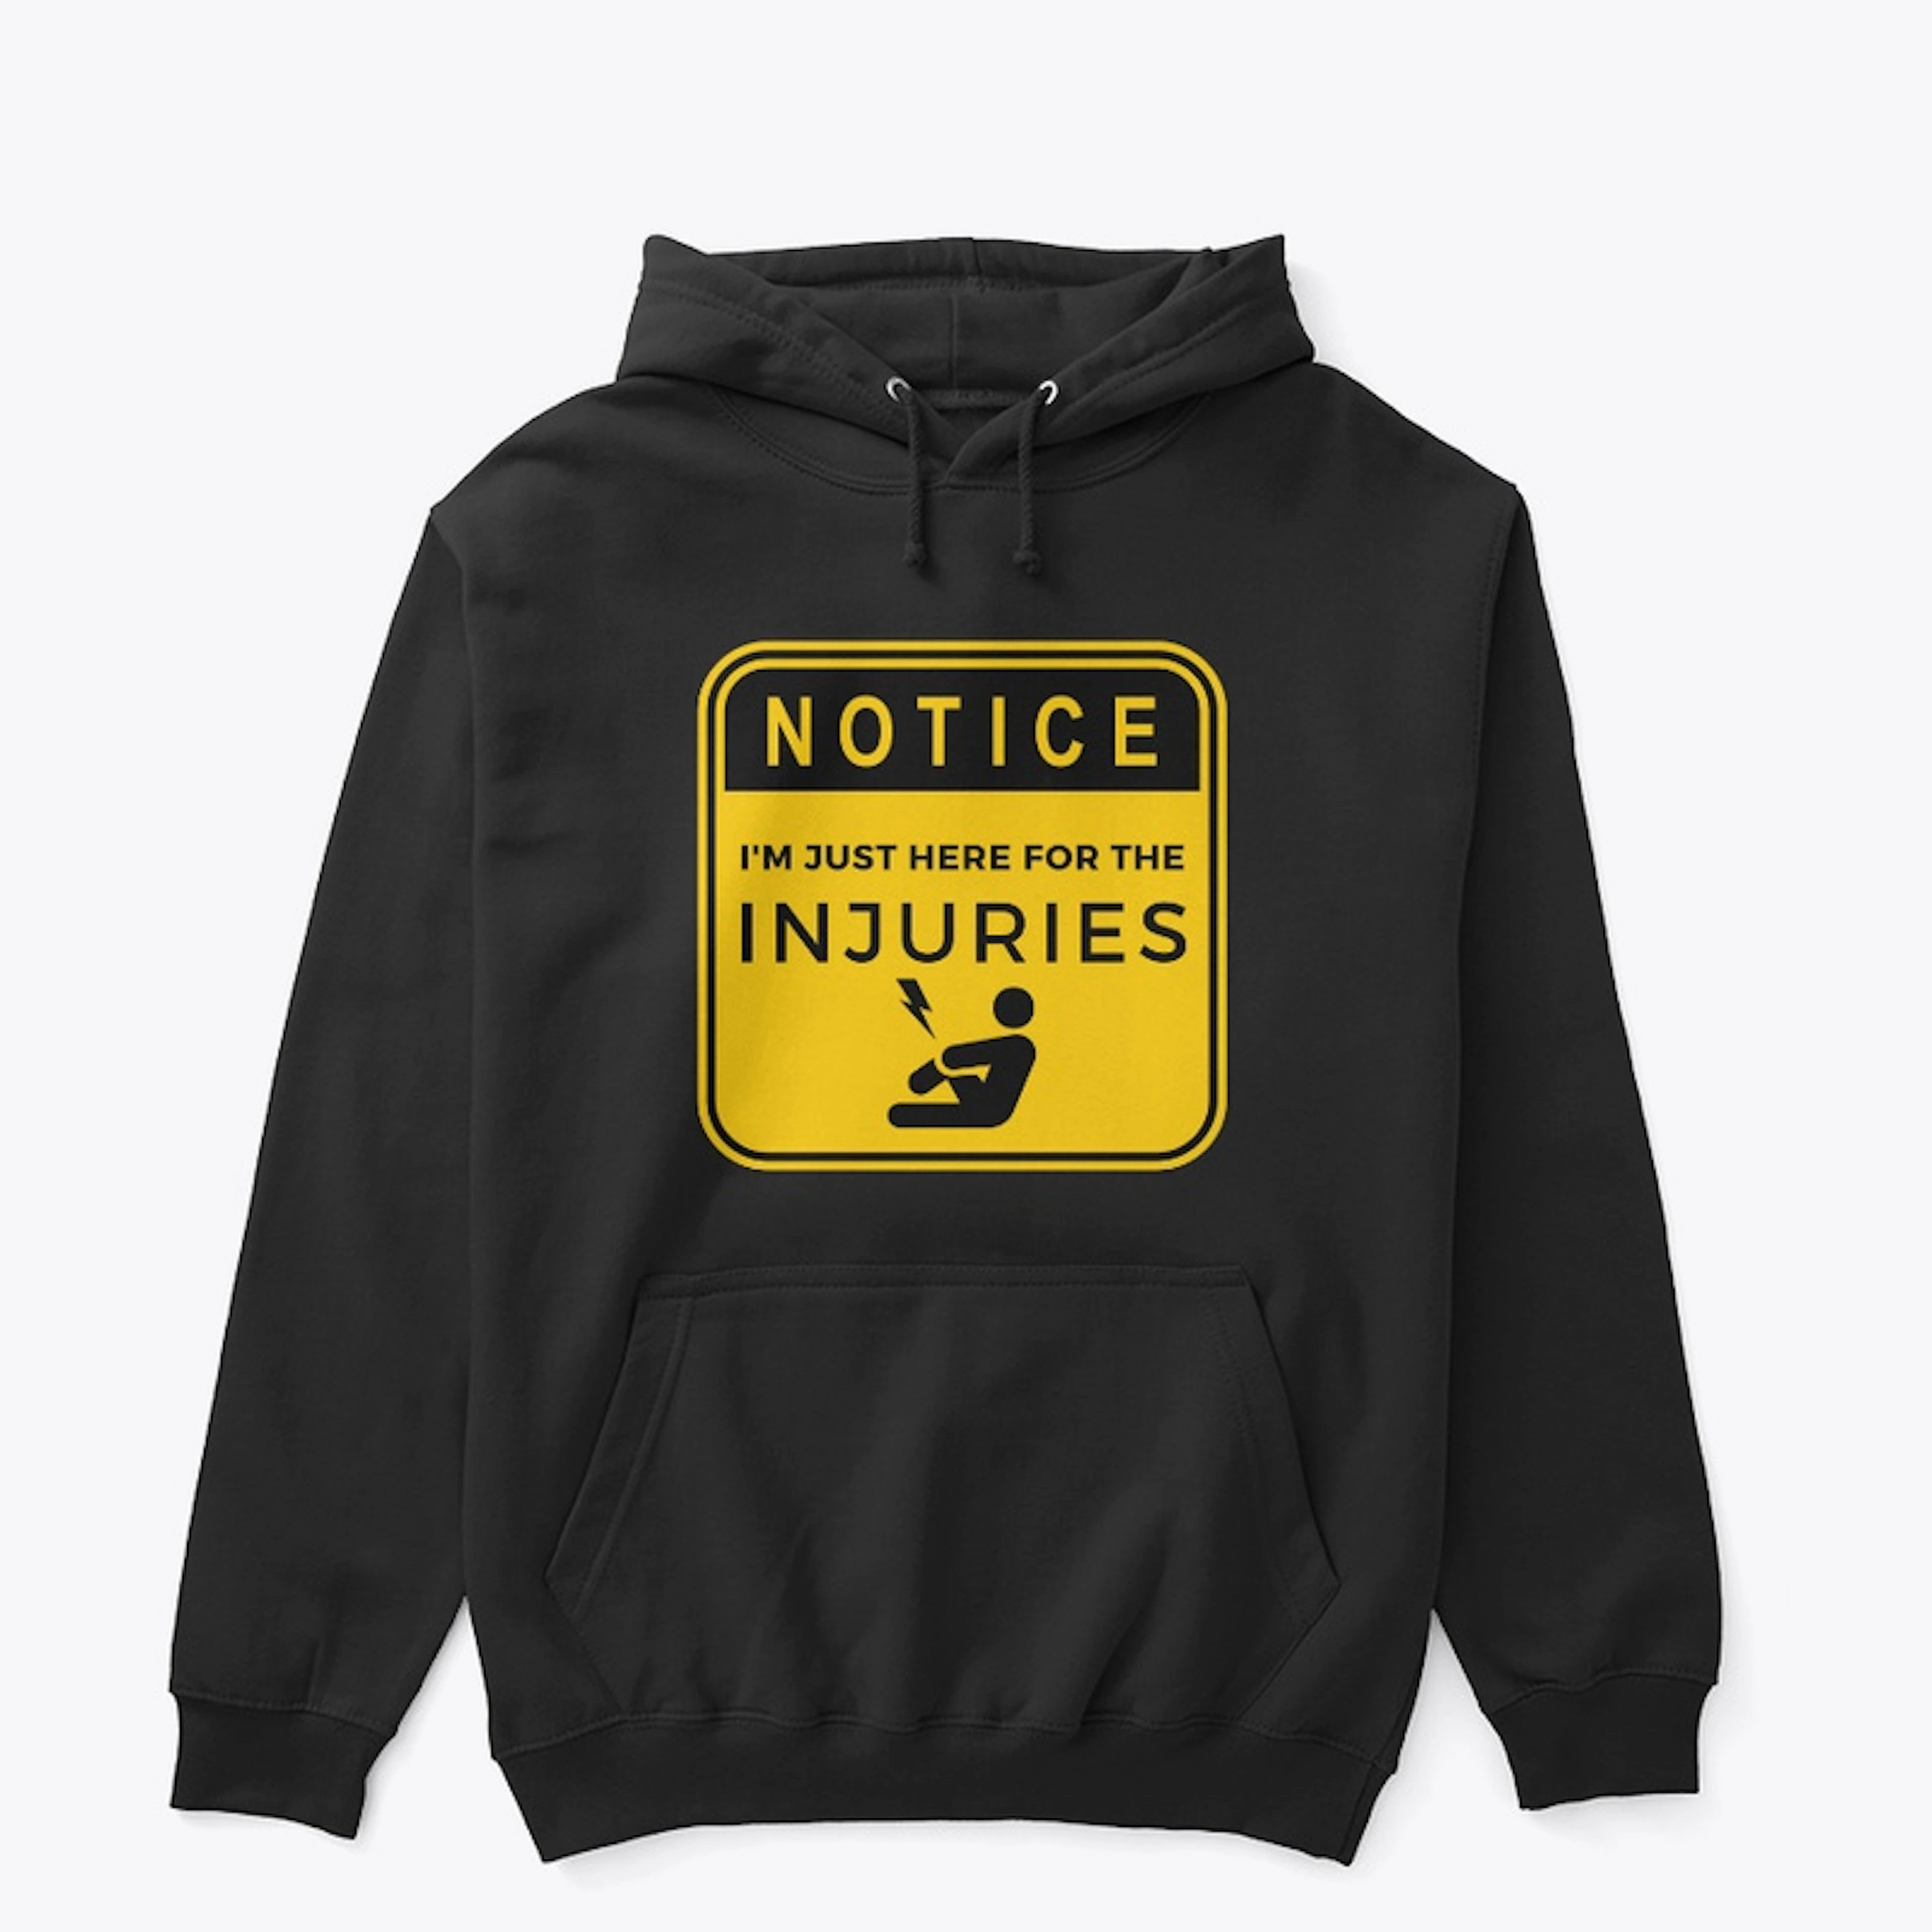 I'm Just Here for the Injuries - Hoodie